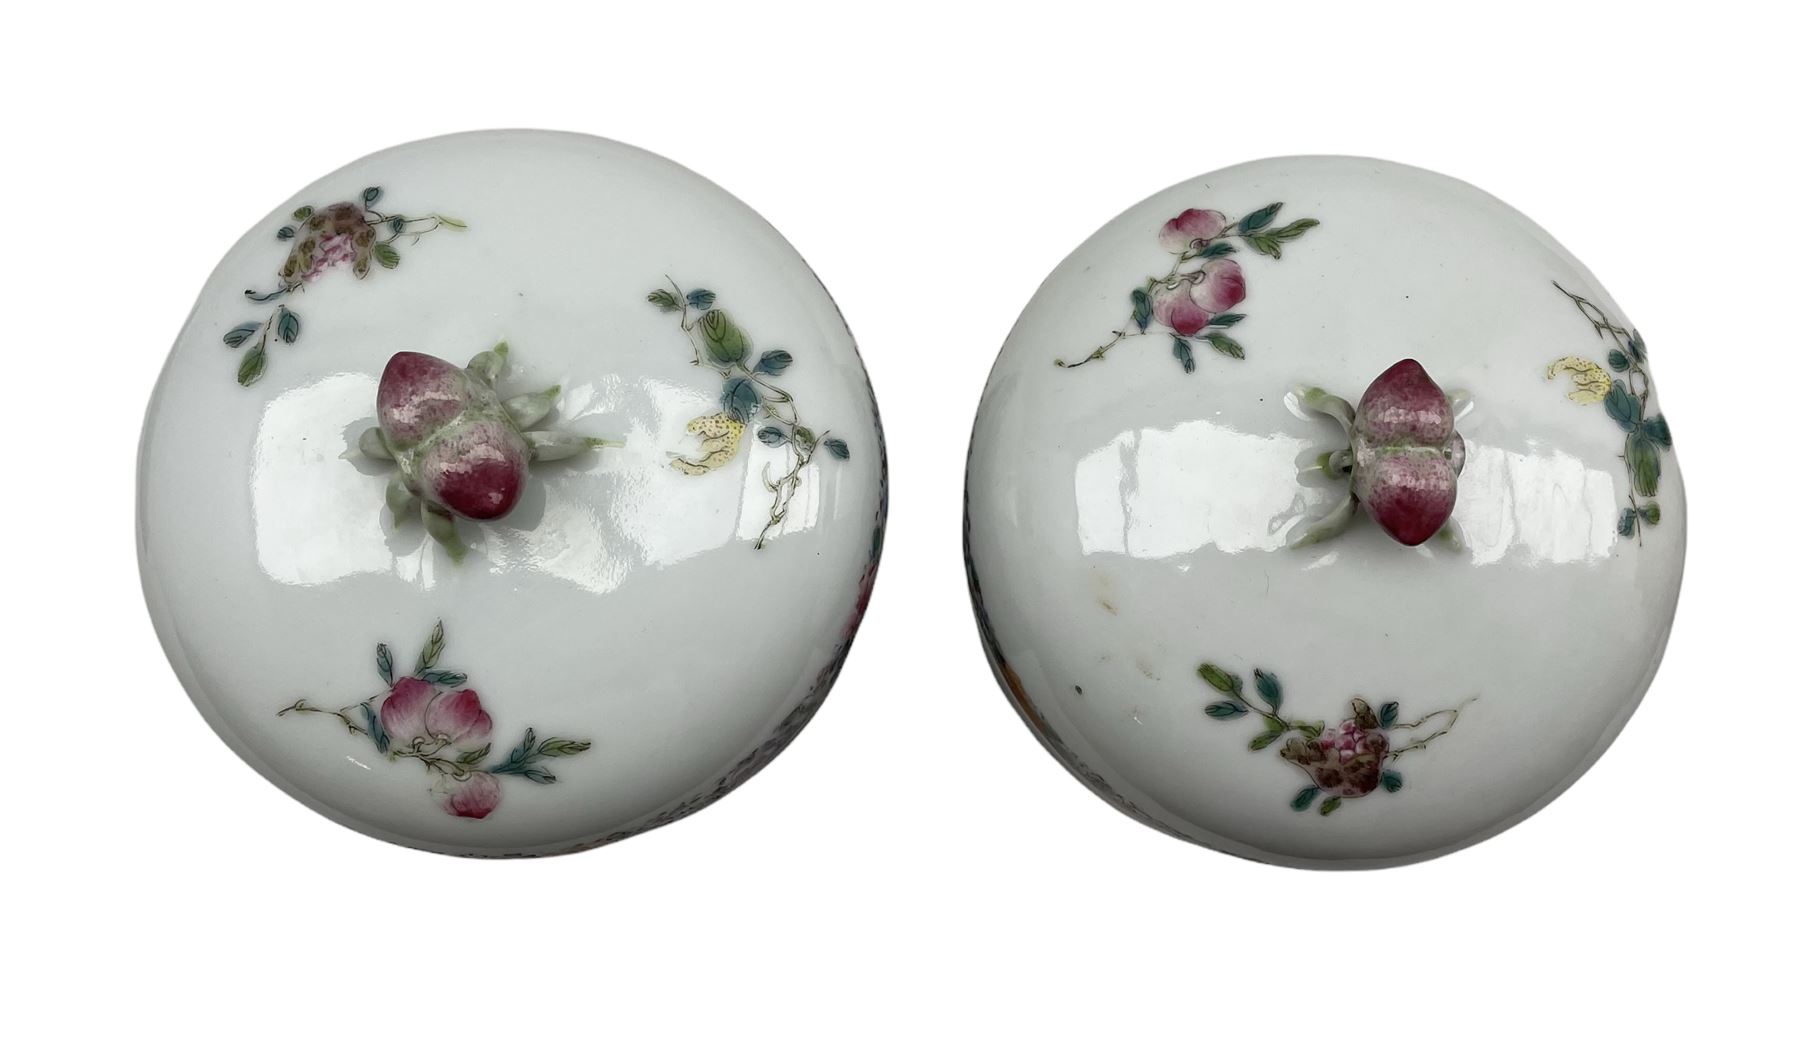 Pair of Chinese Republic Period porcelain bowls and covers - Image 4 of 8